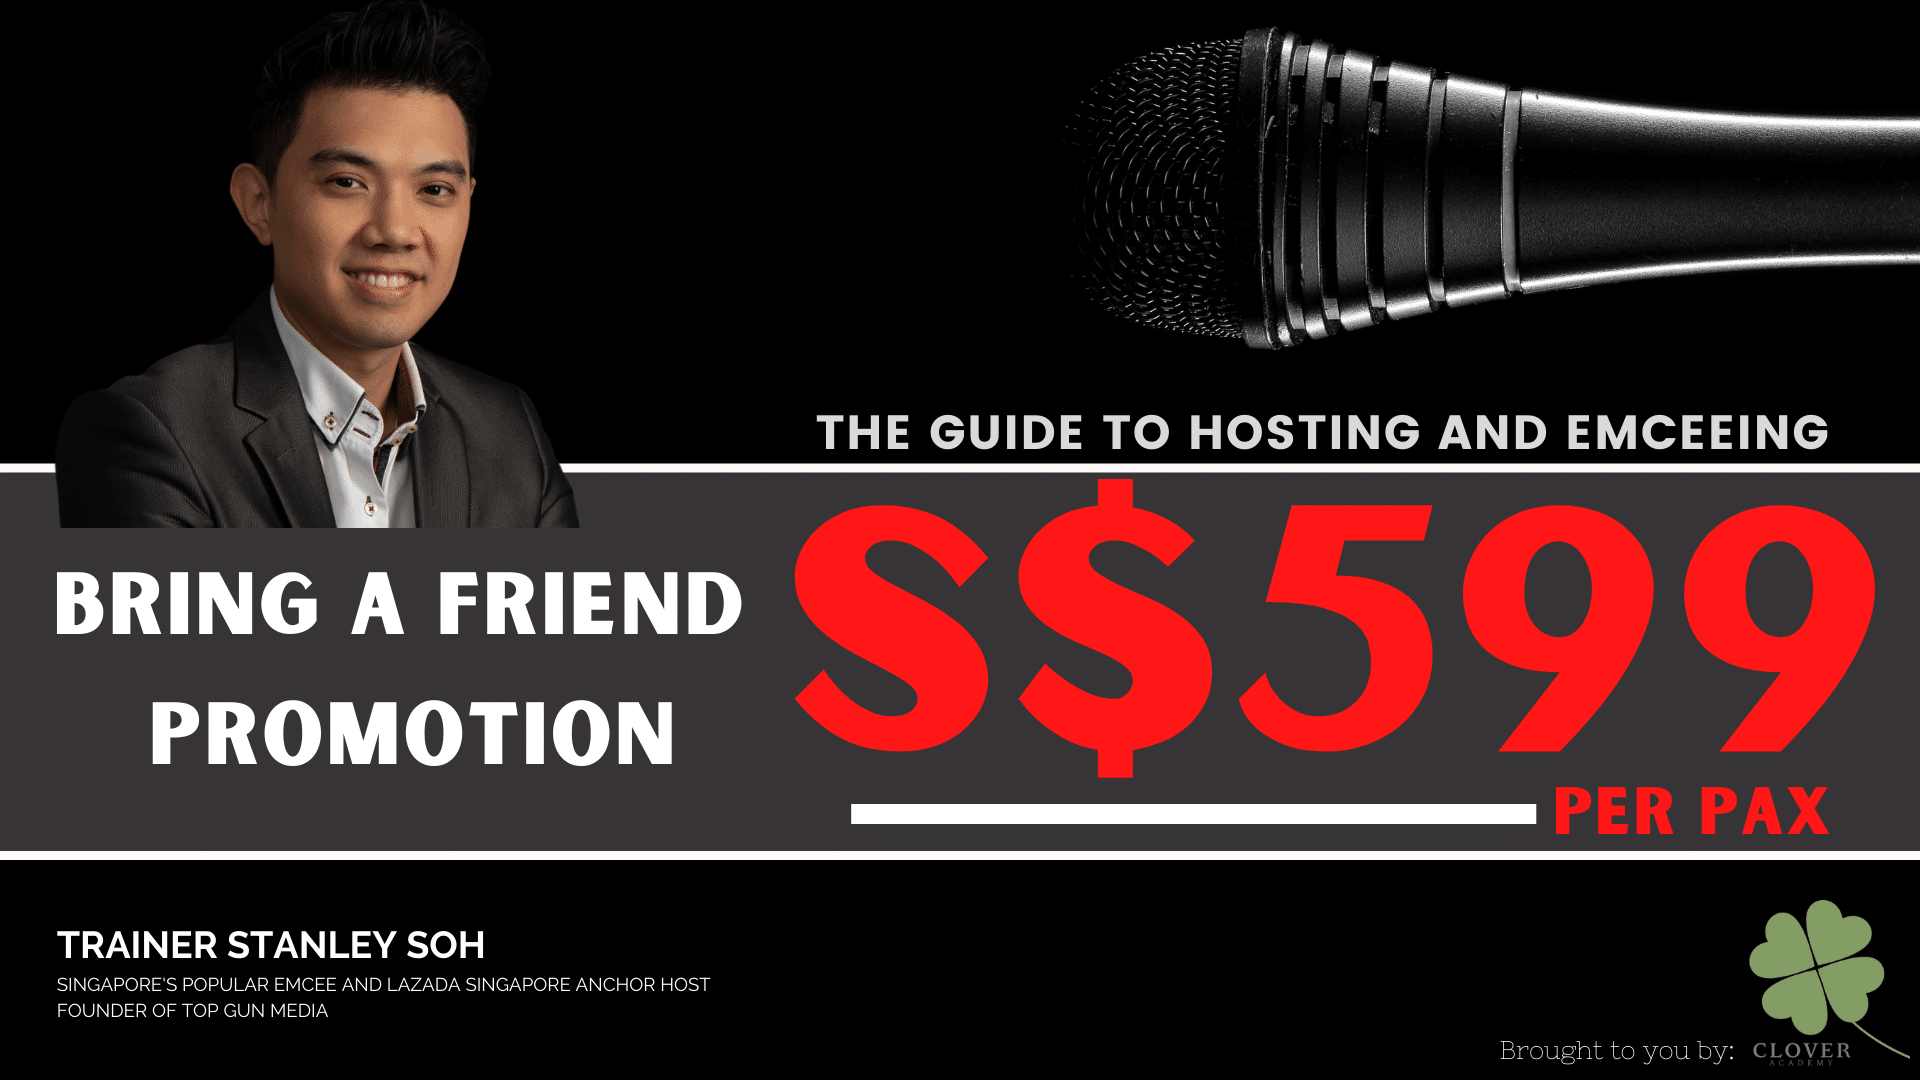 Bring a Friend Promotion- The Guide to Hosting & Emceeing